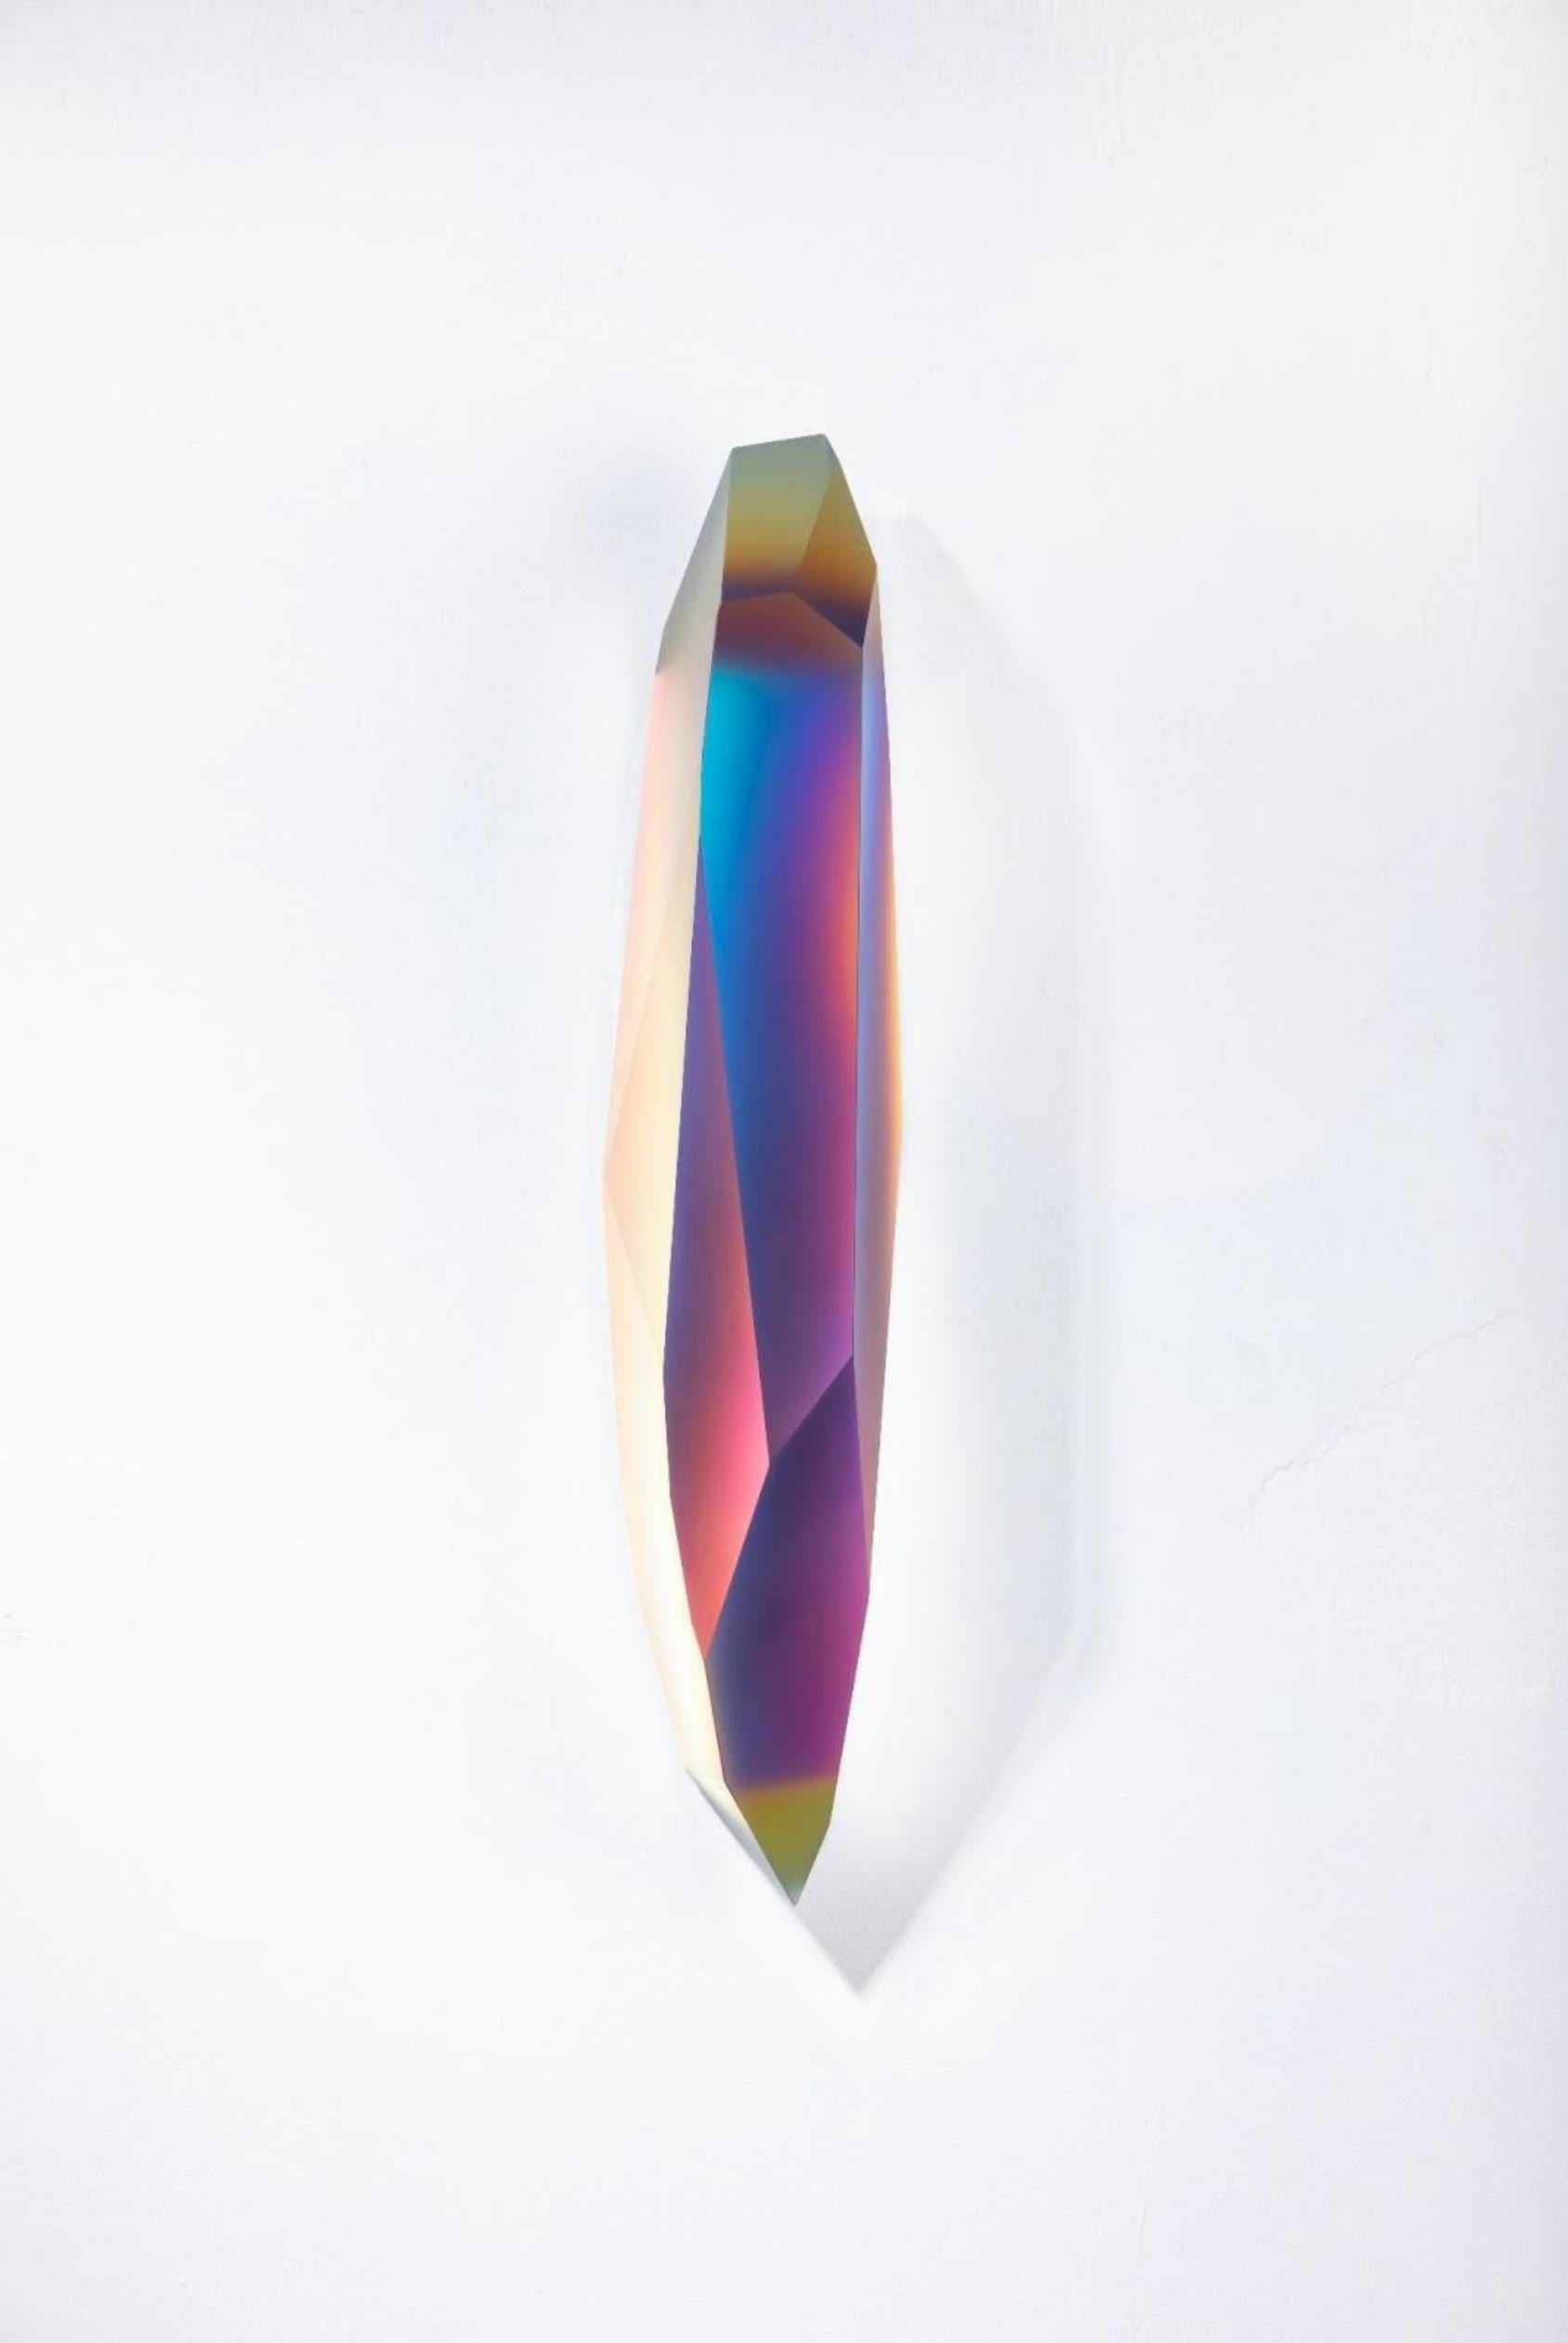 Pretty Mirage 0206 by Lukas Novak
Dimensions: W 16 x D 16 x H 63 cm
Materials: Cut Glass, Crystal, Color Gradient

The Pretty Mirage series is made out of wall crystals. It is a unique composition of cuts in glass and a color gradient. Lukas Novak